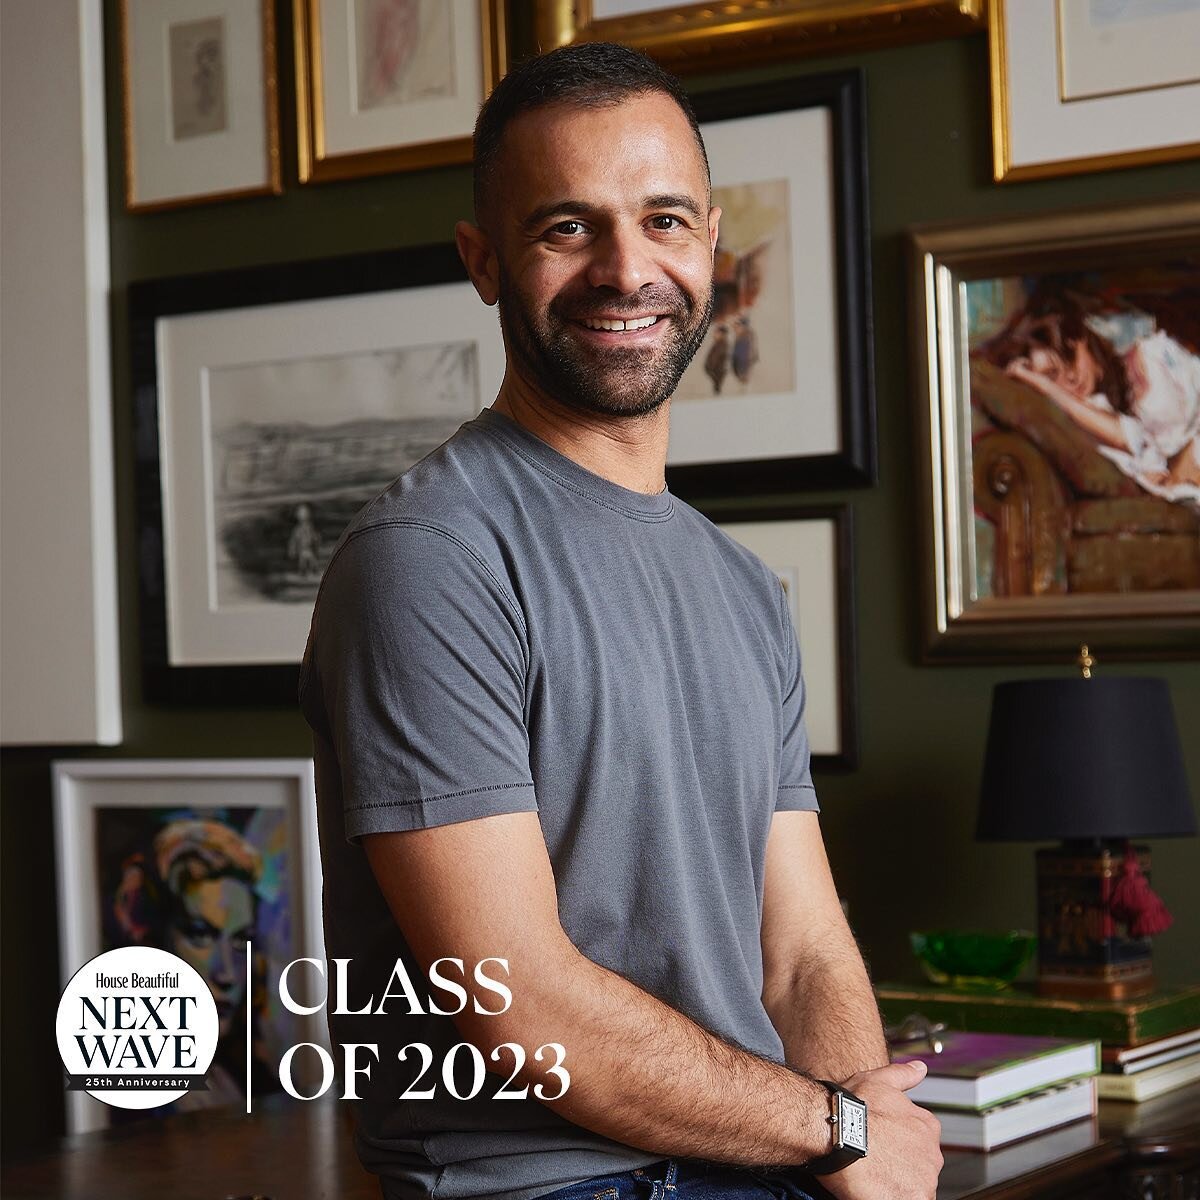 BIG congratulations to @ahmad.abouzanat on being named to @housebeautiful Next Wave Class of 2023!!👏🍾

From designing sleek high rise apartments across New York City to reimagined wellness spaces at the prestigious @kbshowhouse and advocating for t